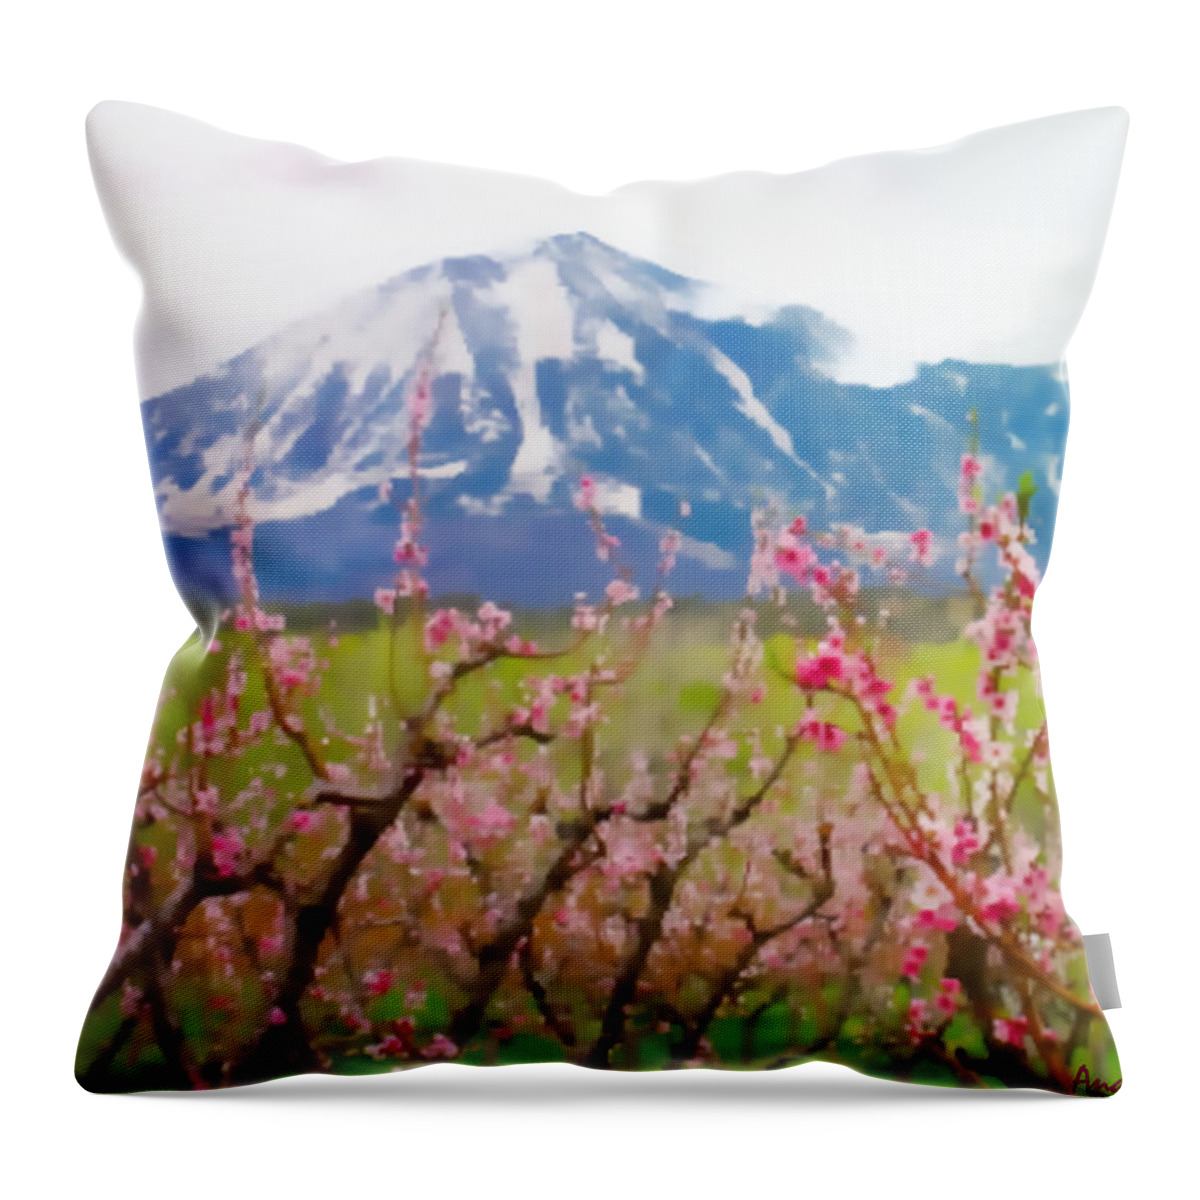 Peach Blossoms Throw Pillow featuring the photograph Paonia Peach Blossoms and Lamborn IV by Anastasia Savage Ealy